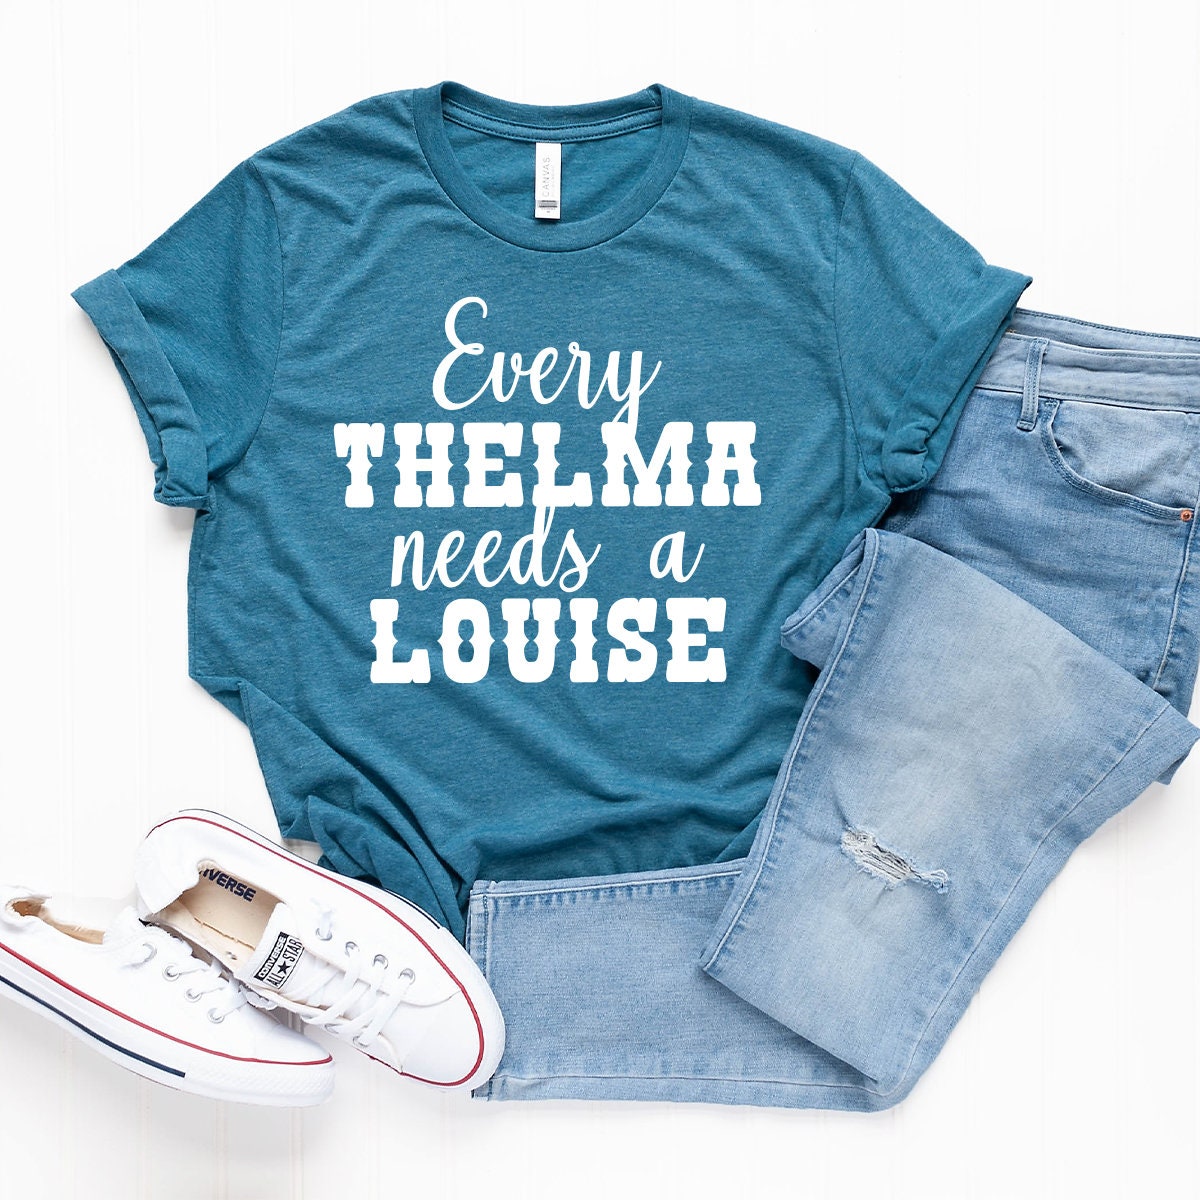 Are You Thelma Or Louise?  Best friend quotes, Friends quotes